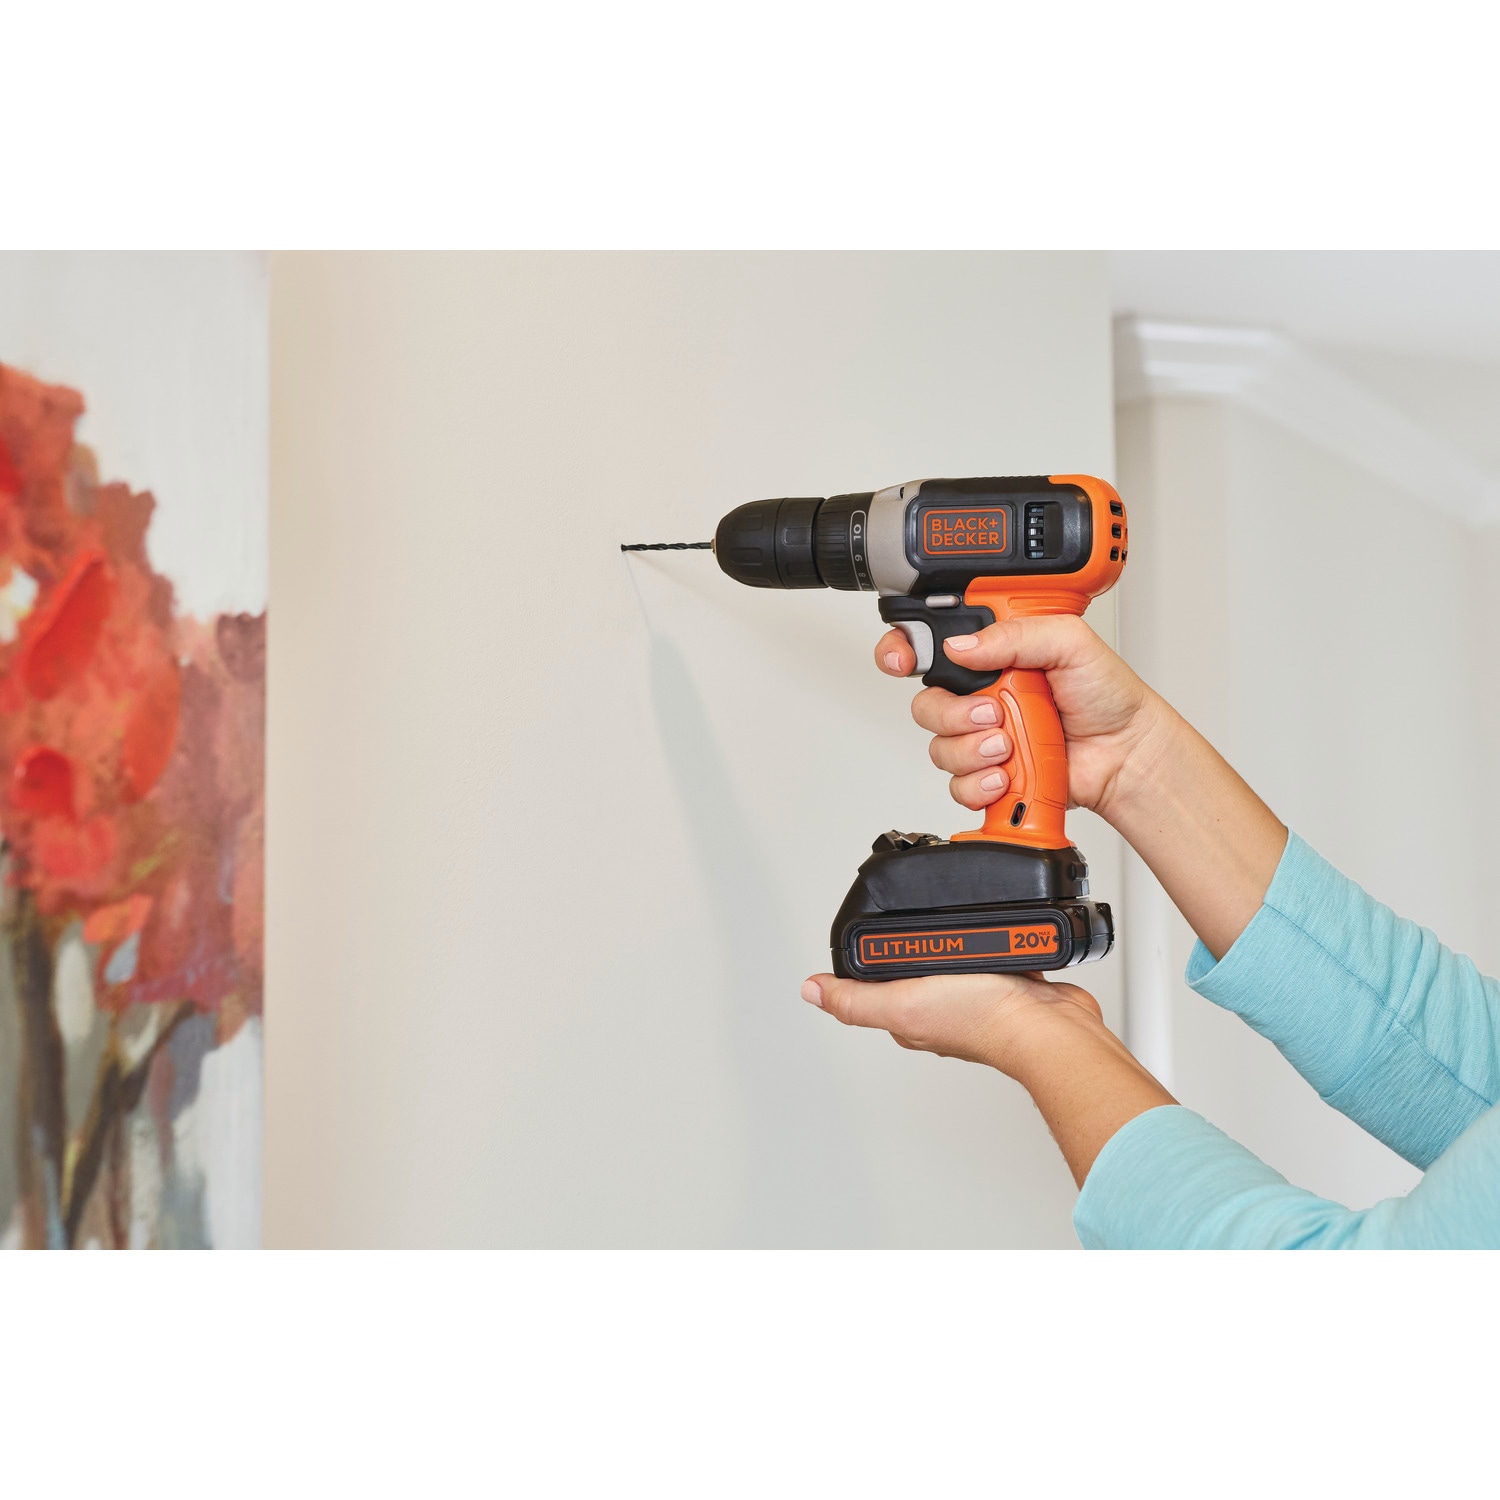 Stanley Black & Decker - Drill, saw, sand with one Black & Decker Matrix  Quick Connect System drill and its interchangeable attachments, you can do  it all